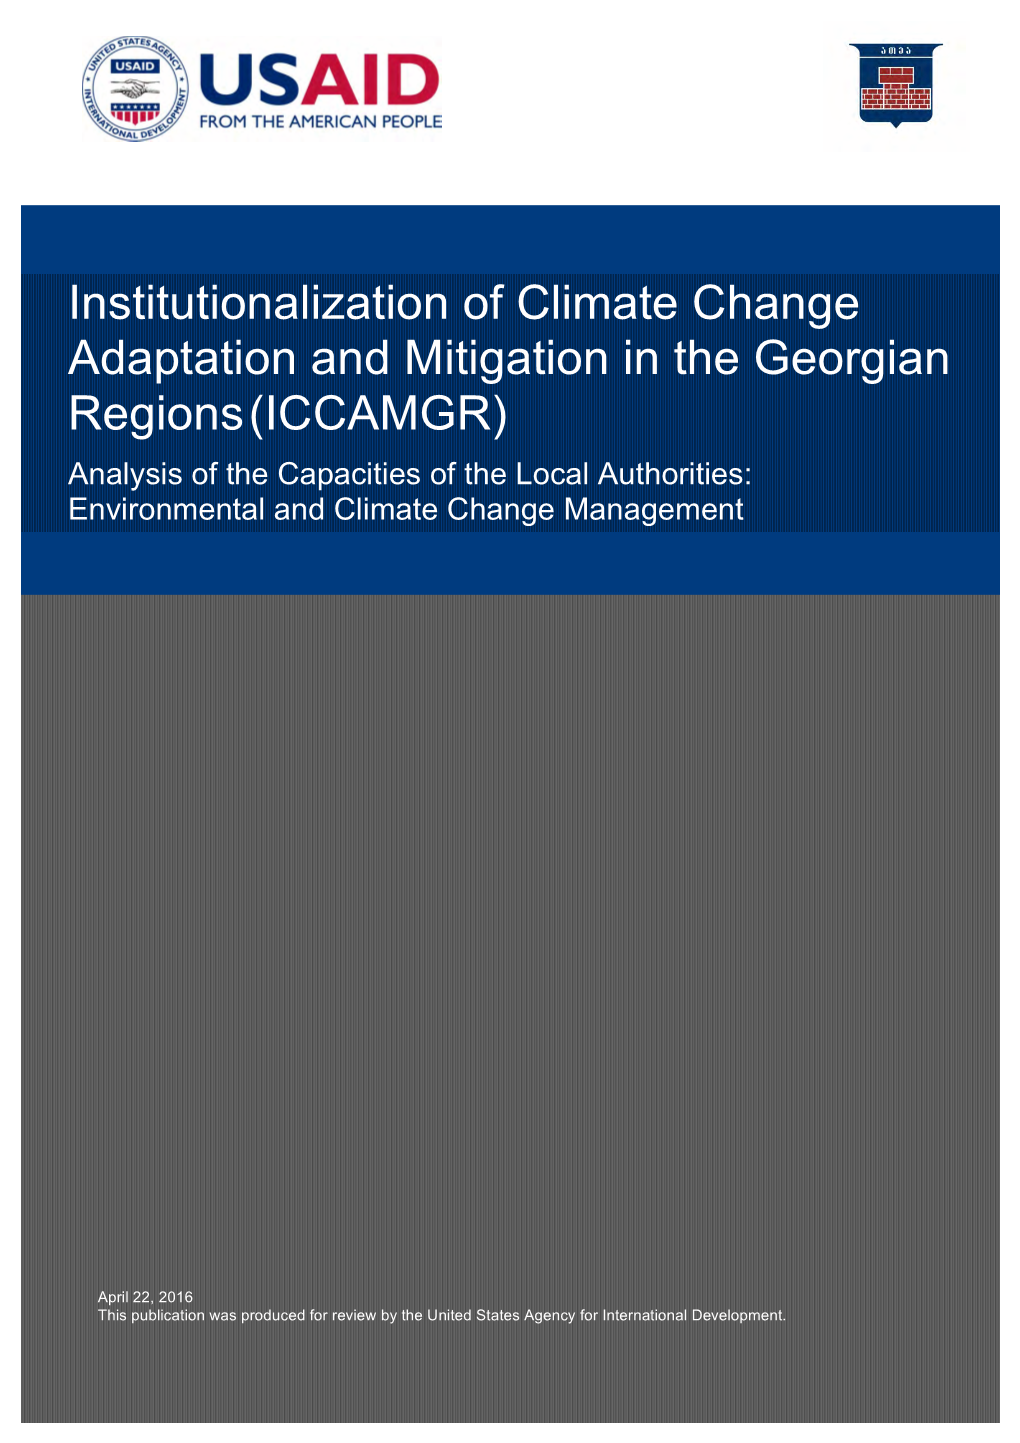 Institutionalization of Climate Change Adaptation and Mitigation in The